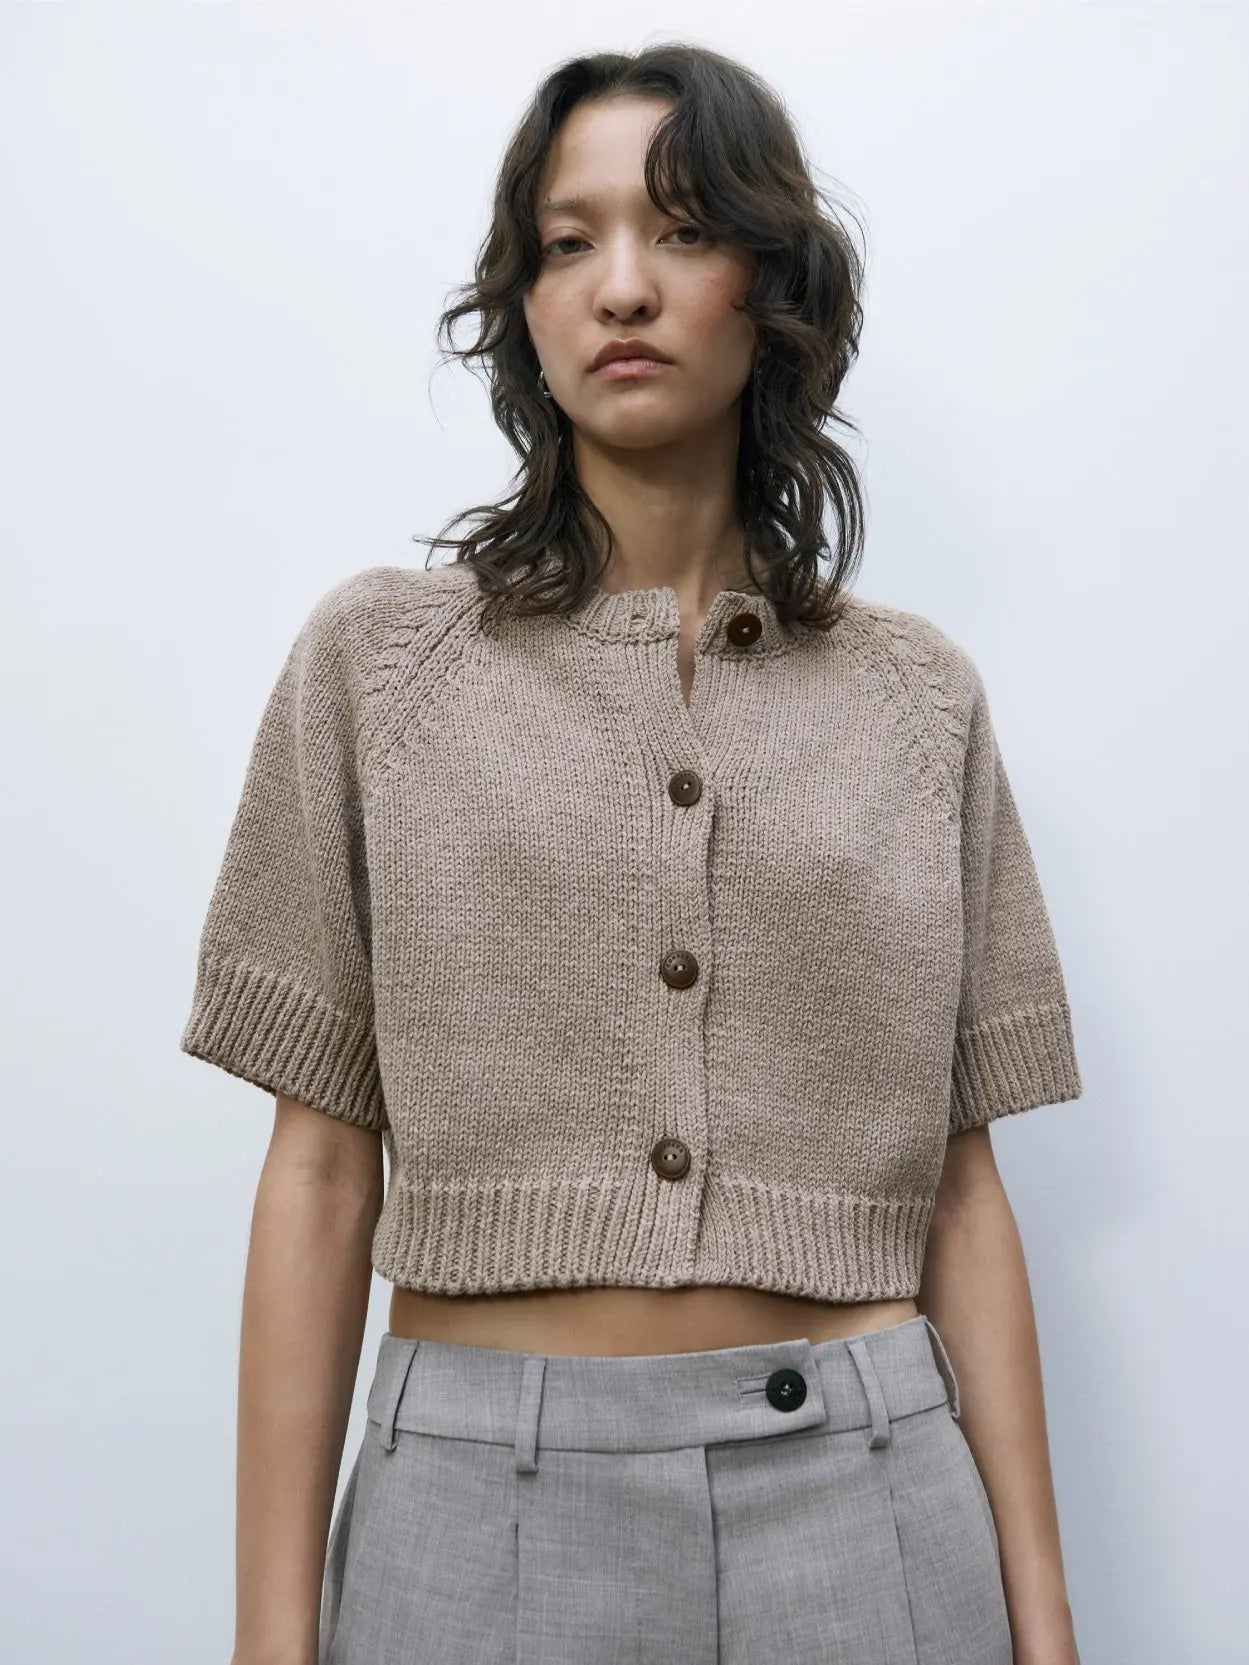 A beige knit **Cotton Buttoned Top Taupe** with long sleeves, a round neckline, and three brown buttons down the front. The top has a ribbed hem and cuffs, and a white label inside with text. Displayed against a plain white background, it’s available exclusively at Bassalstore in Barcelona by **Cordera**.